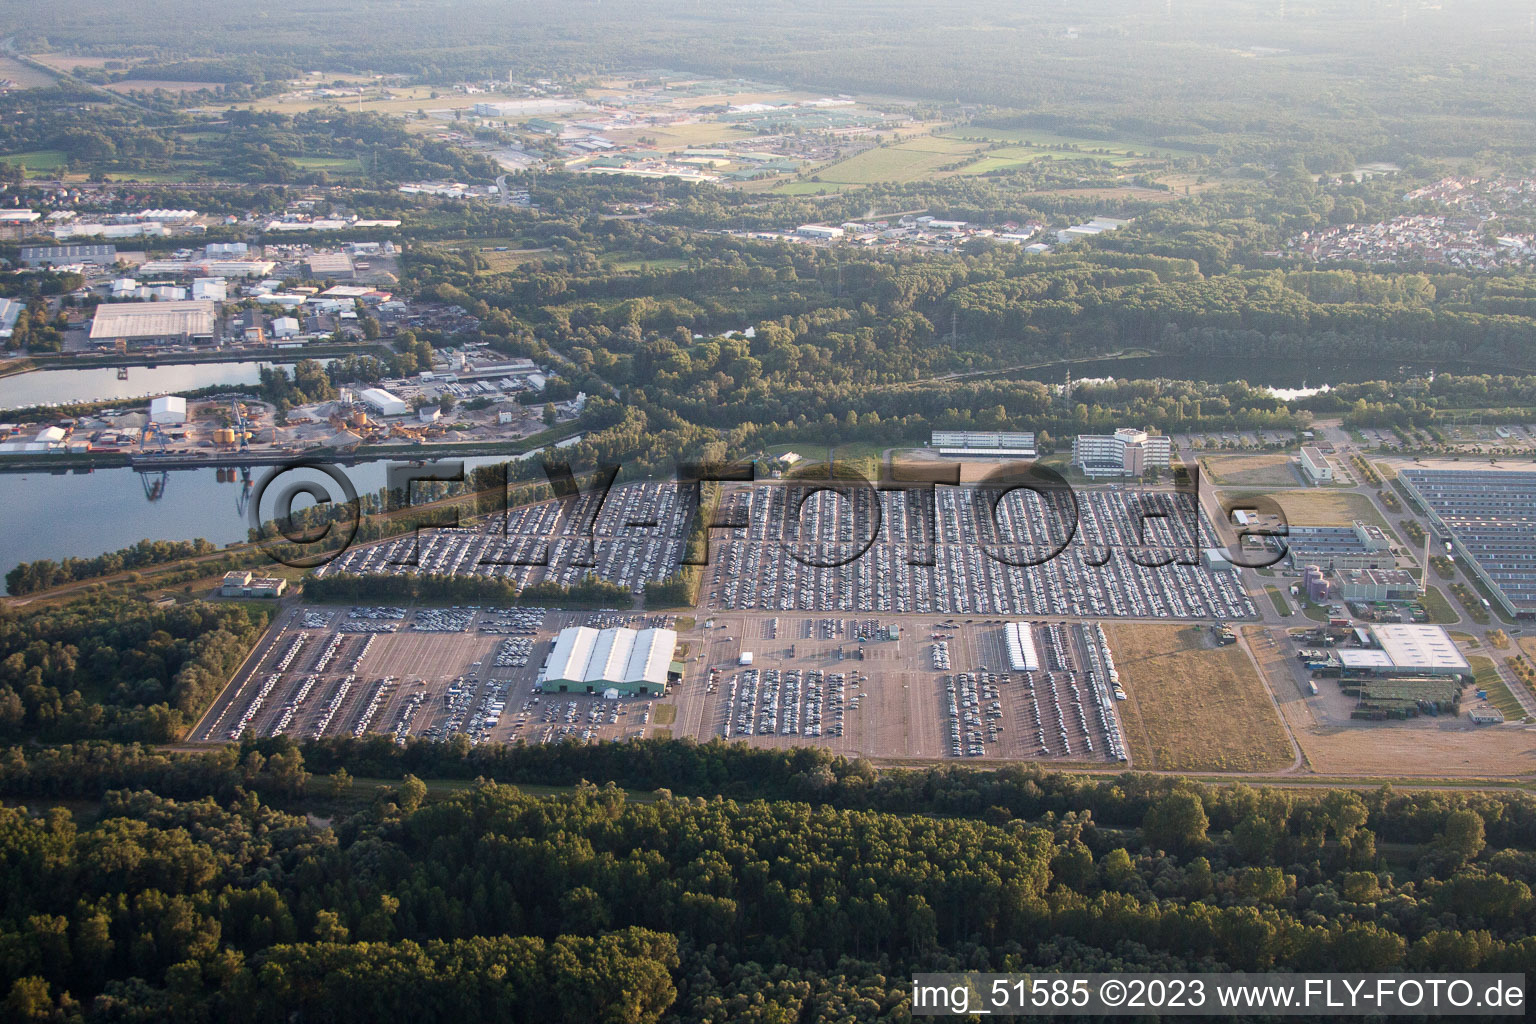 Daimler GLC on the island of Green in Germersheim in the state Rhineland-Palatinate, Germany from the plane